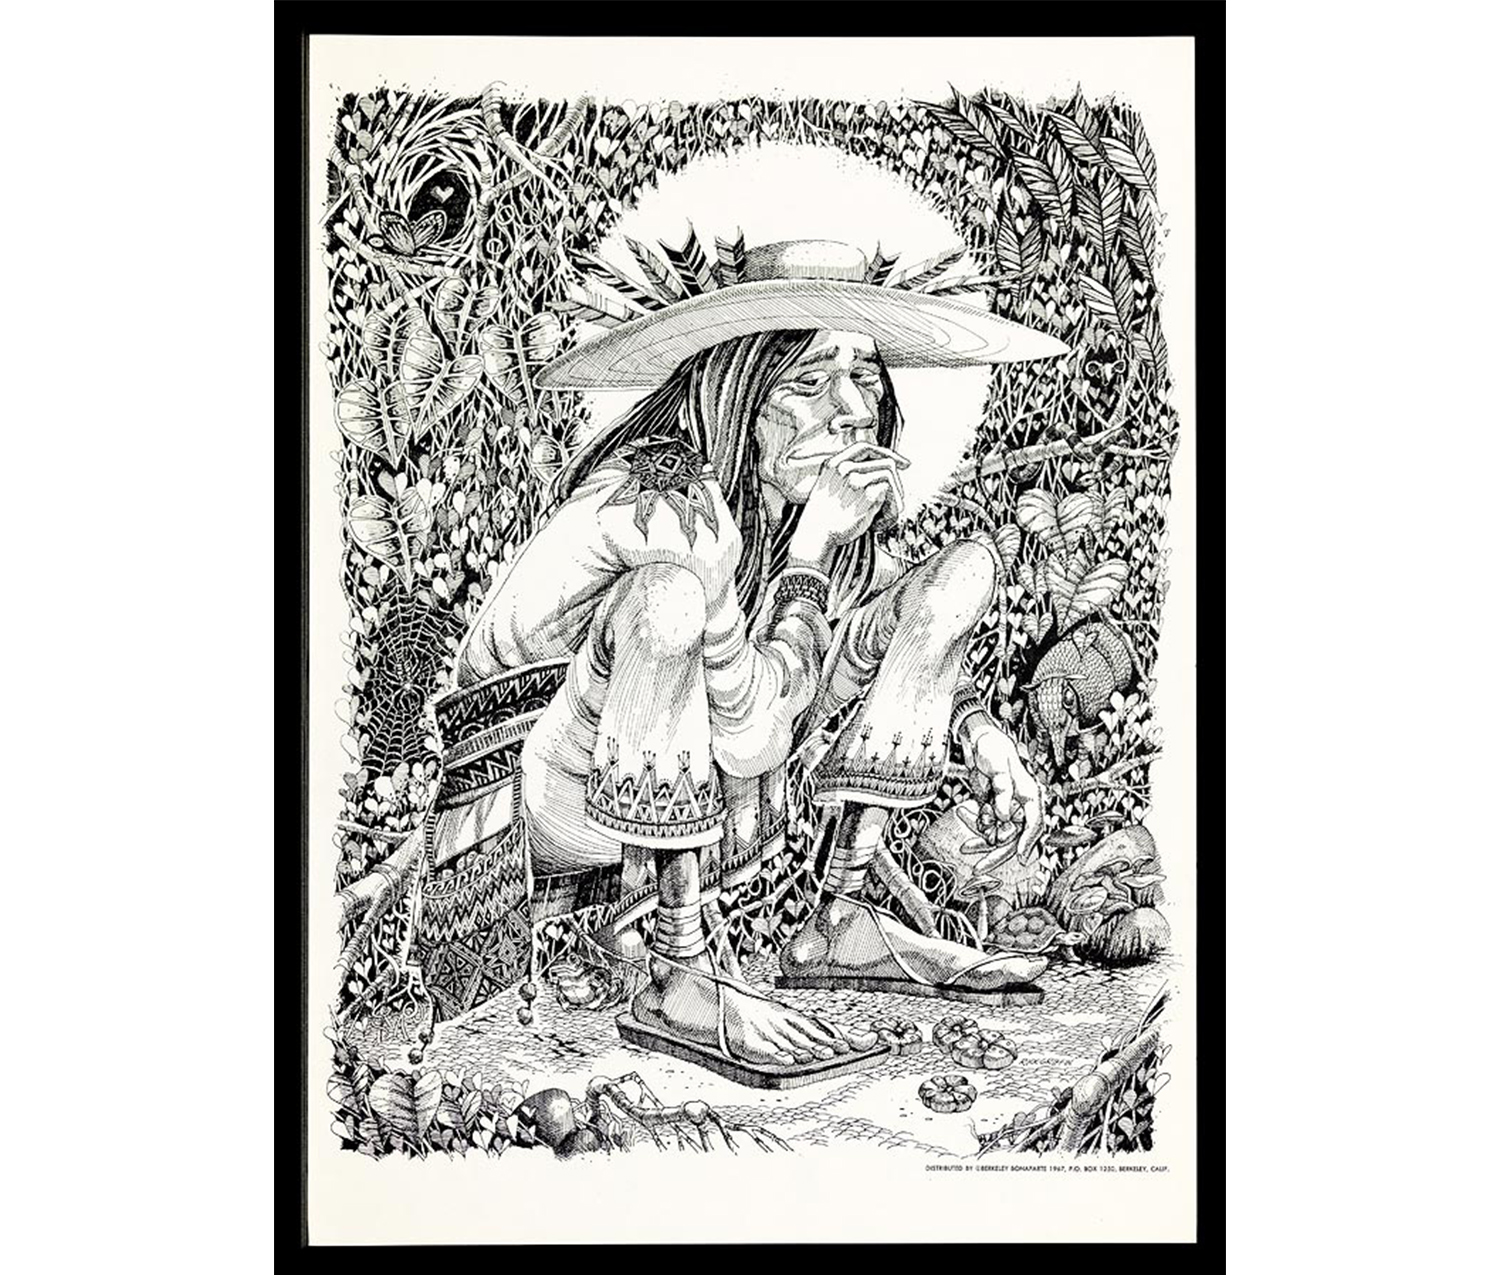 elaborate landscape with leaves, vines, spider web with spider, butterfly, mouse, armadillo, frog, turtle, and seated man in center with wide hat stuck with feathers, loose shirt and pants with patterned belt and bag, wearing sandals holding flower with four on the ground at his feet